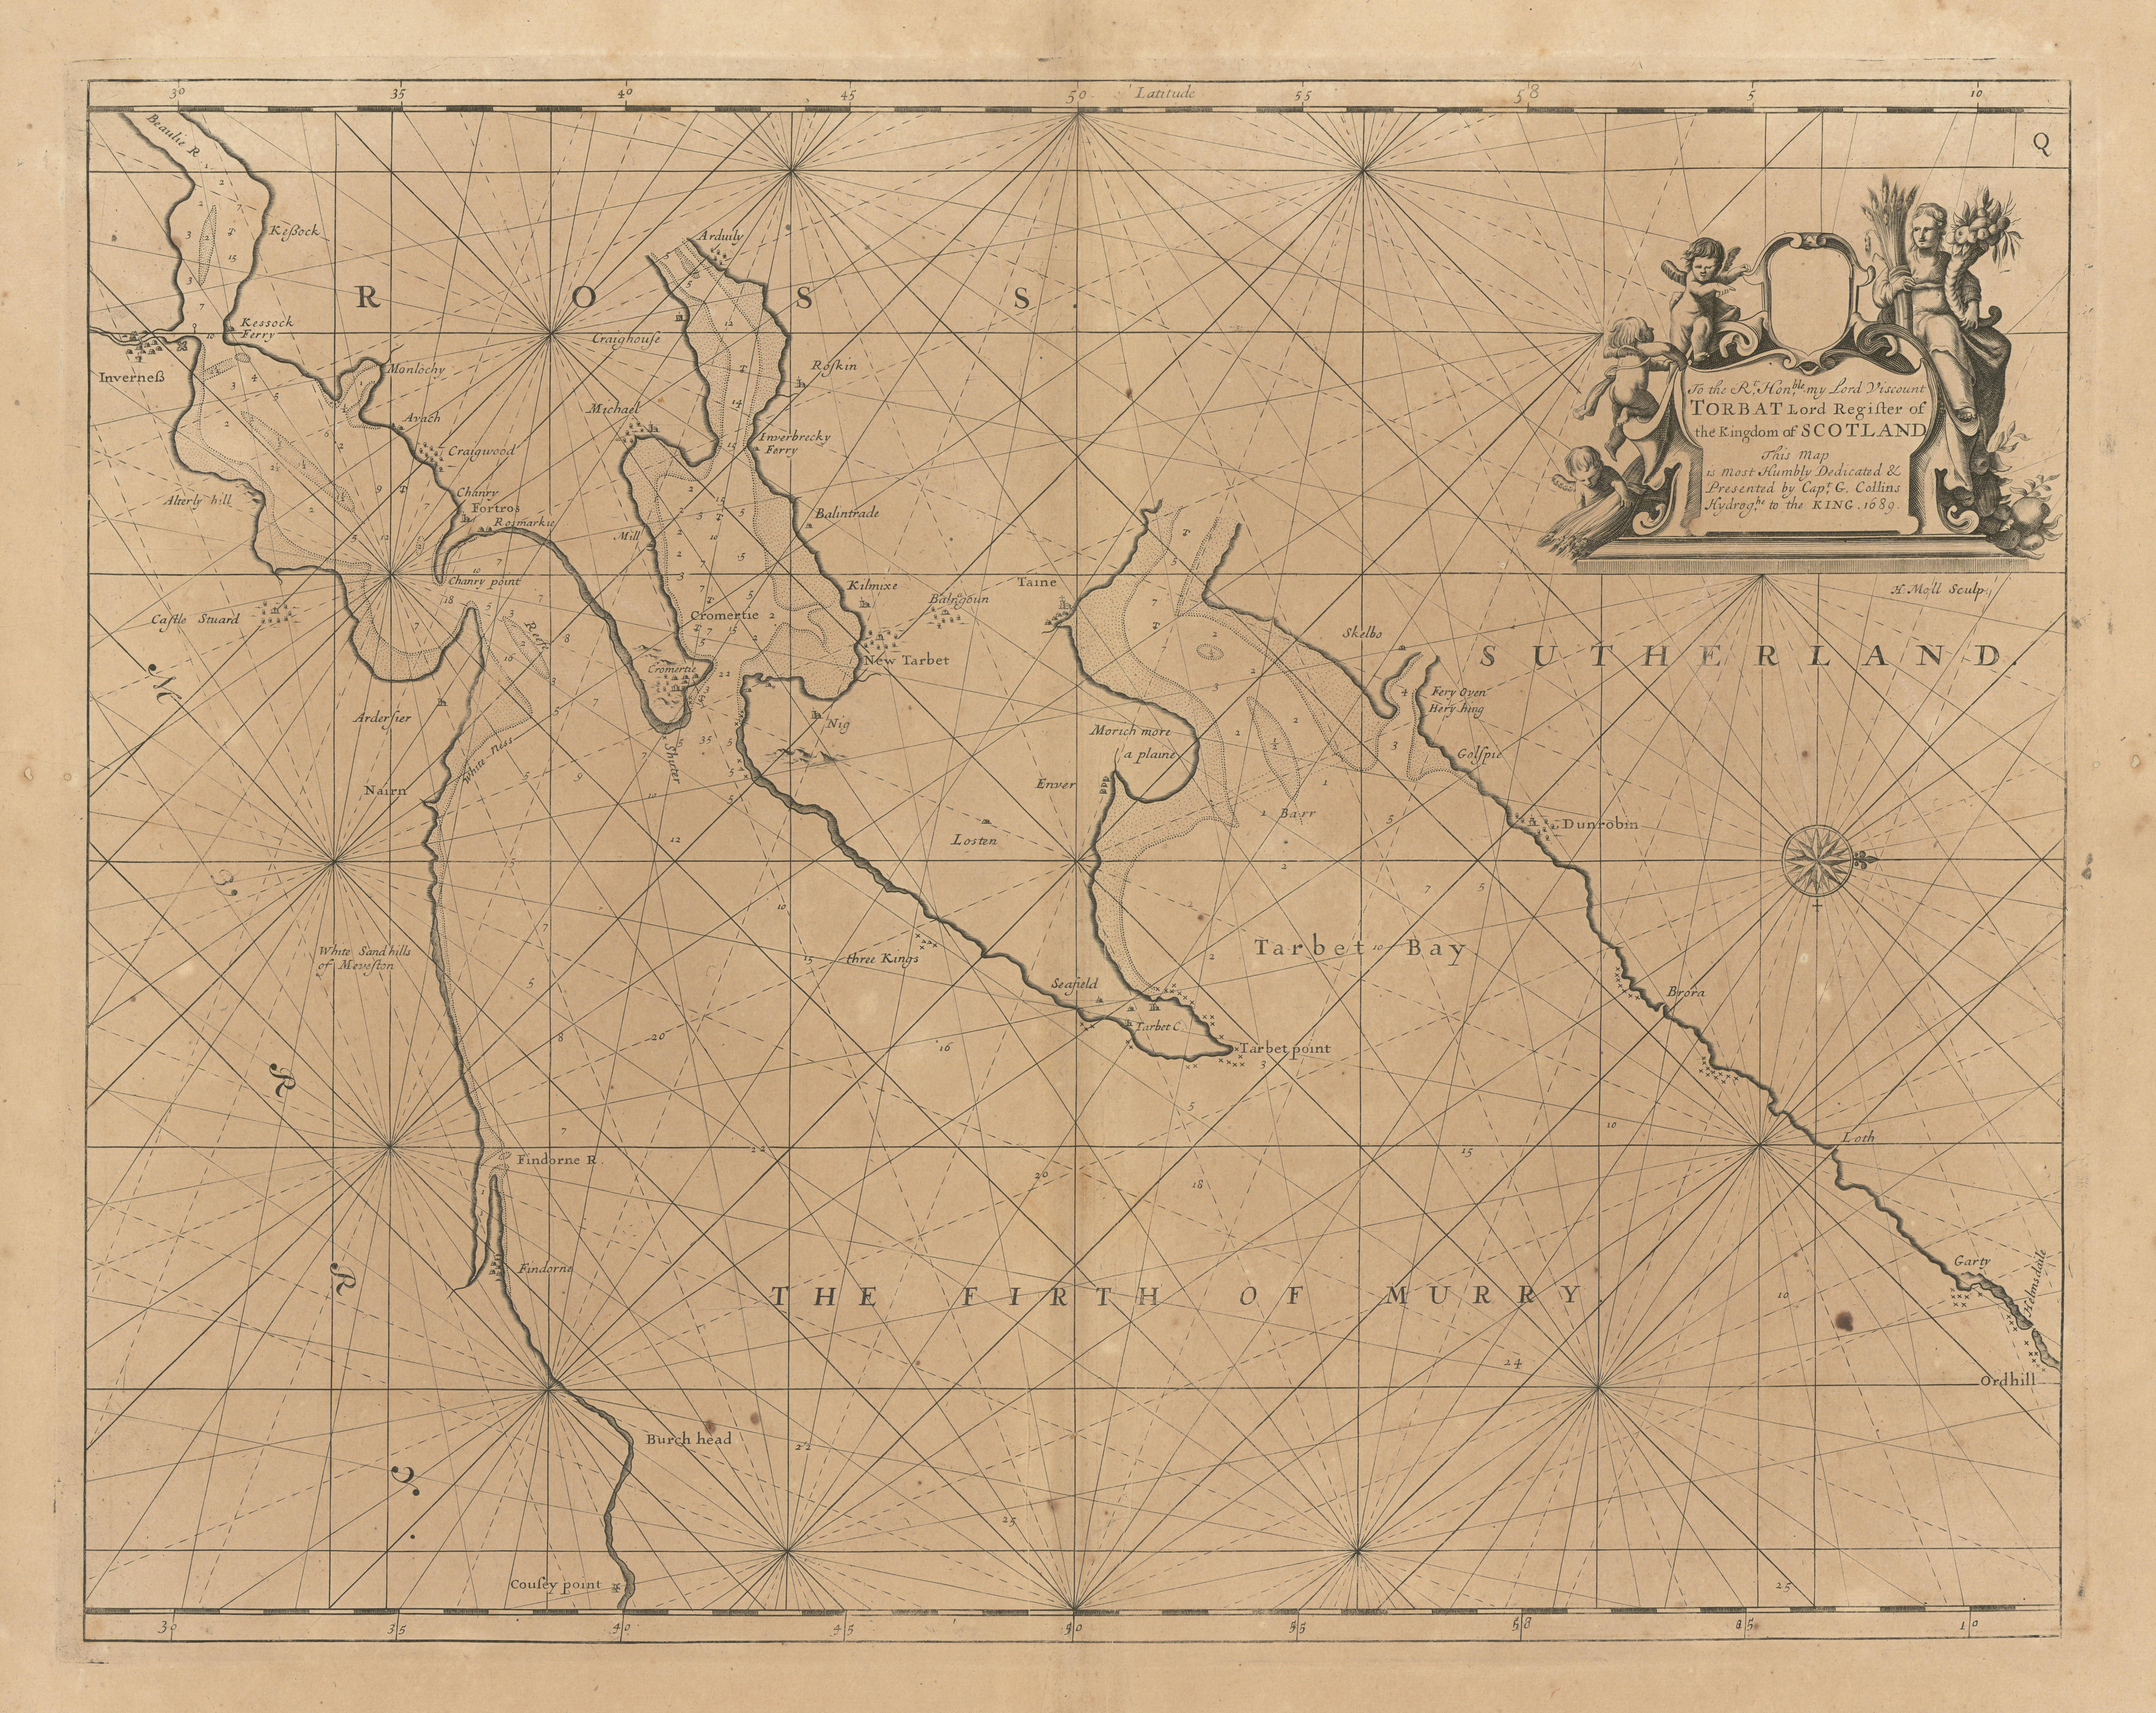 Associate Product Firth of Murry. MORAY FIRTH sea chart Inverness Cromarty. COLLINS 1693 old map